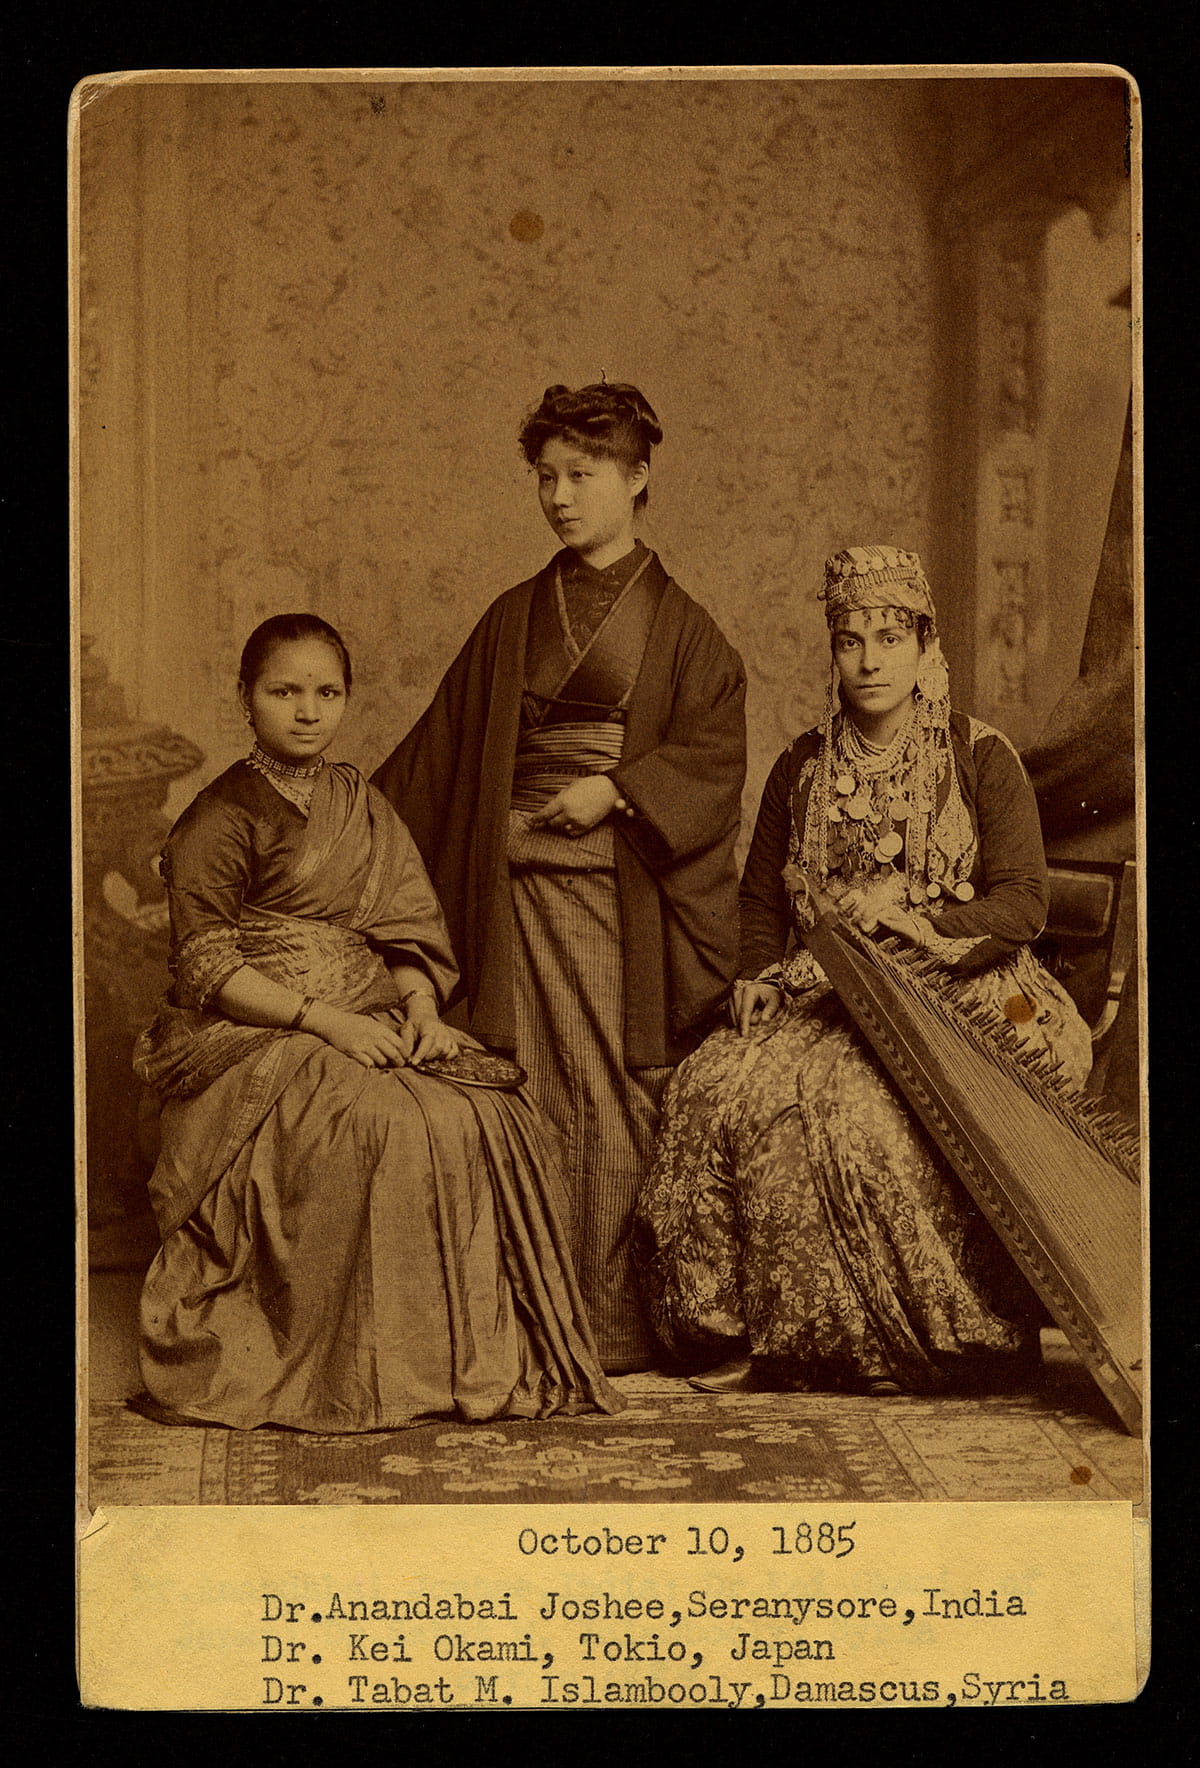 A photo taken in 1885 of Anandibai Joshee, who graduated in 1886; Kei Okami who graduated in 1889; and Sabat Islambooly, who graduated in 1890. Photo courtesy Legacy Center Archives, Drexel College of Medicine. 